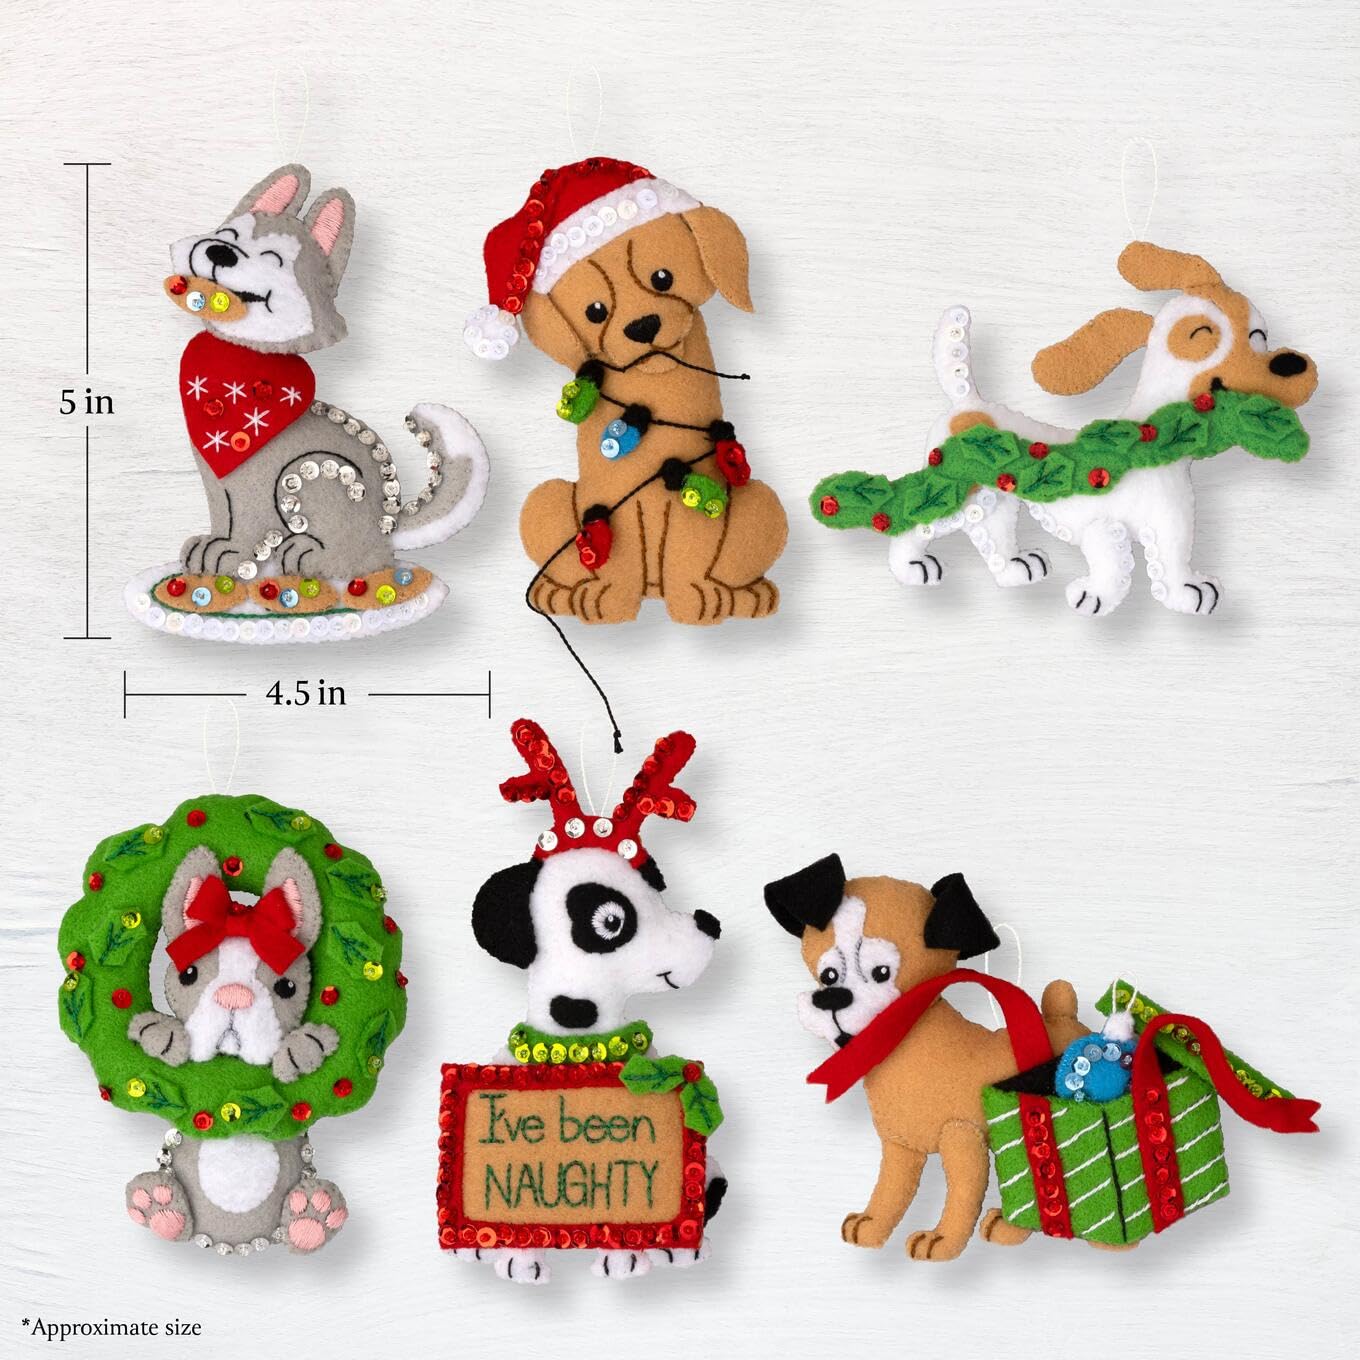 Bucilla, Mischievous Puppies, Felt Applique 6 Piece Ornament Making Kit, Perfect for Holiday DIY Arts and Crafts, 89642E